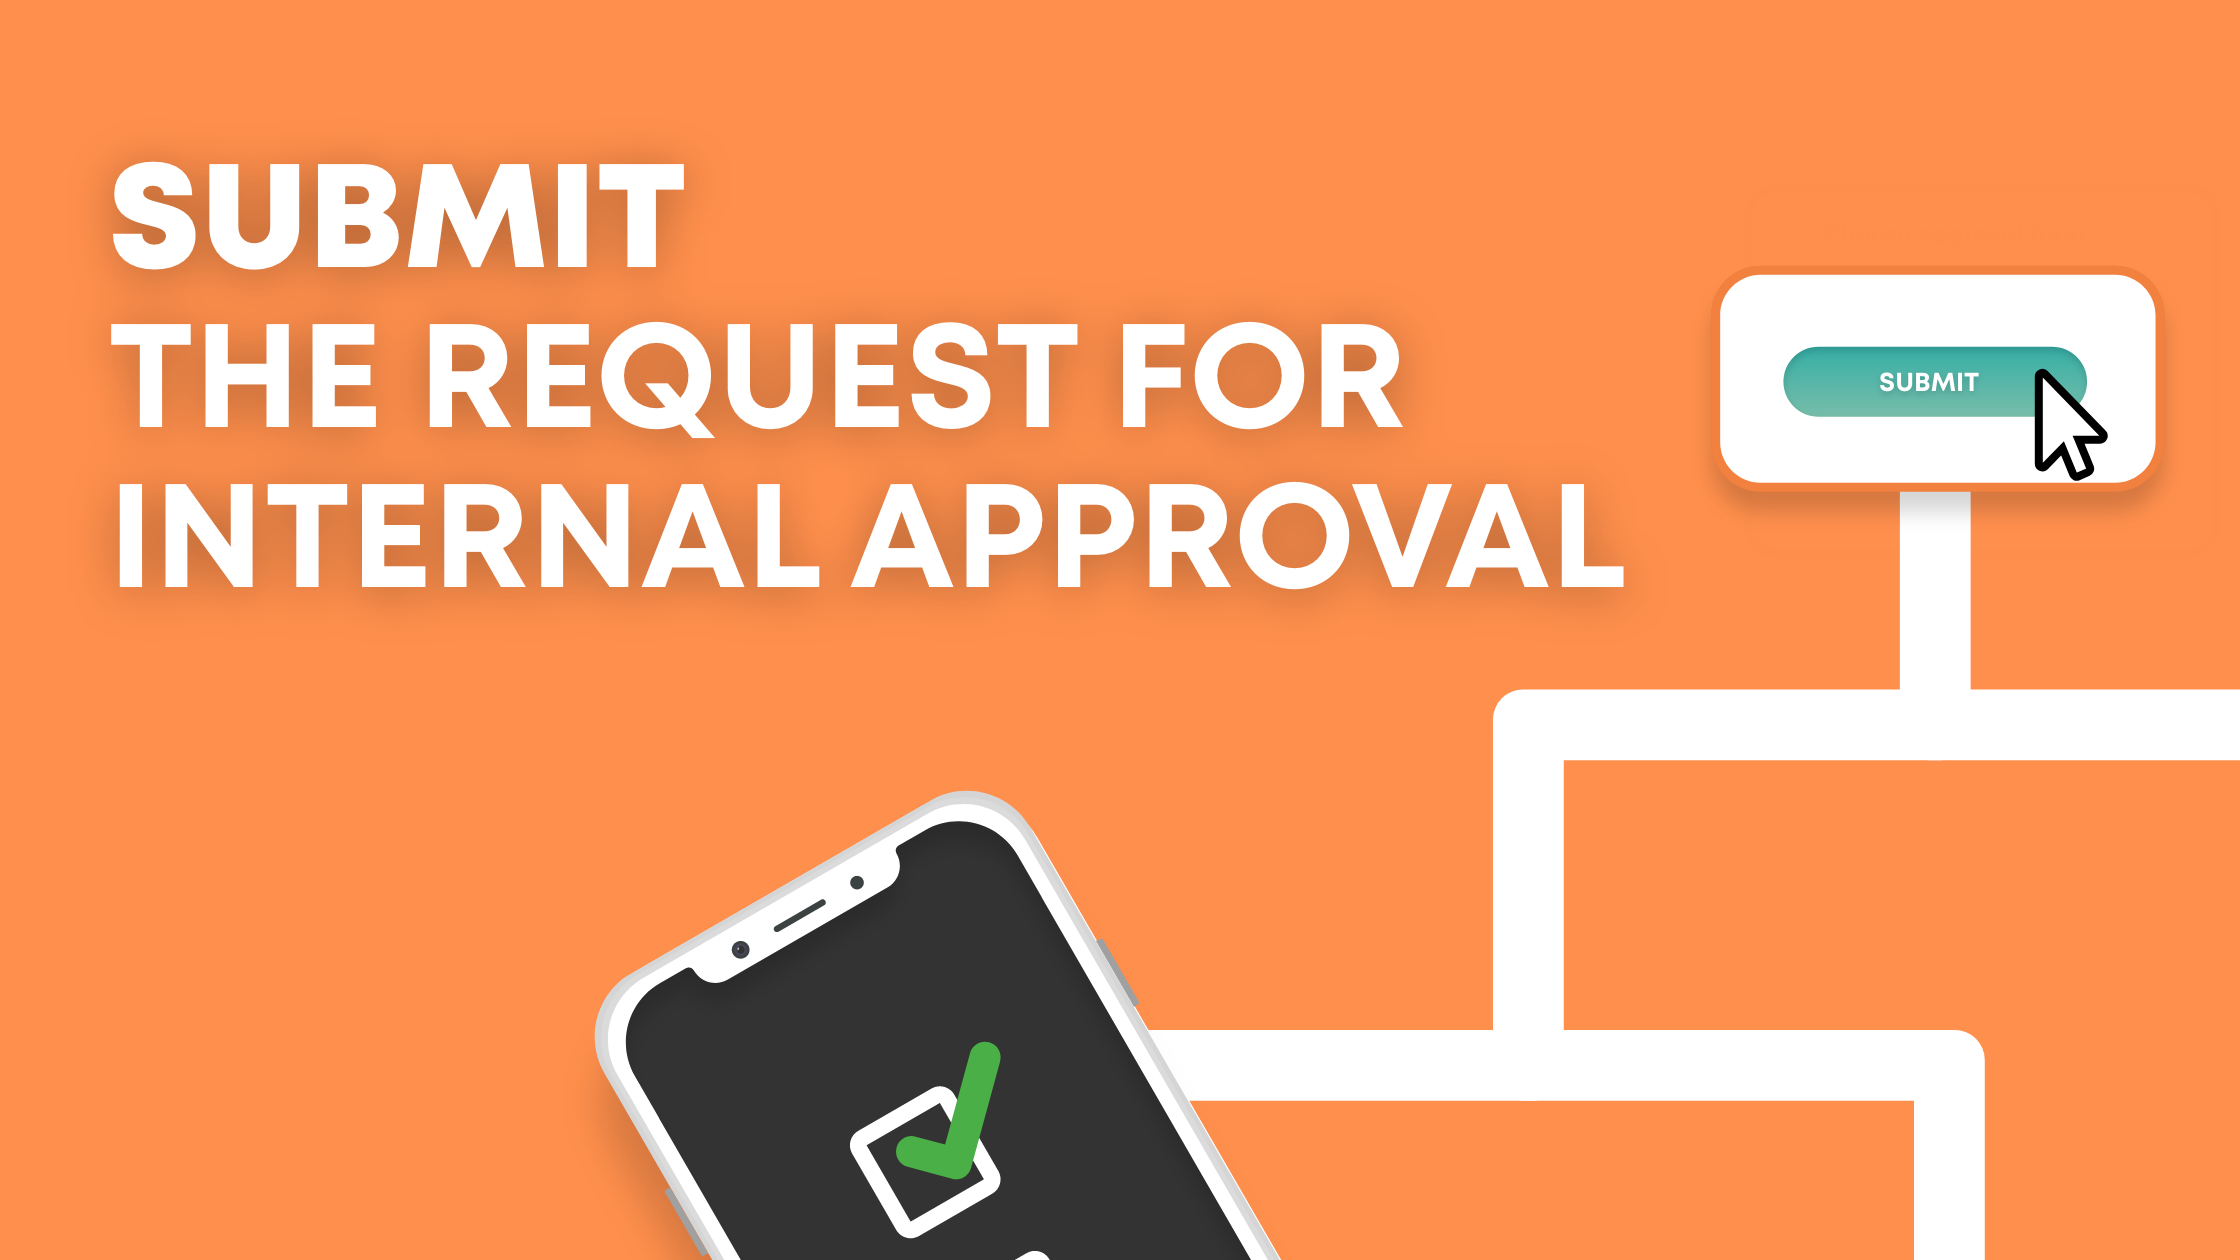 Submitthe-request-for-internal-approval